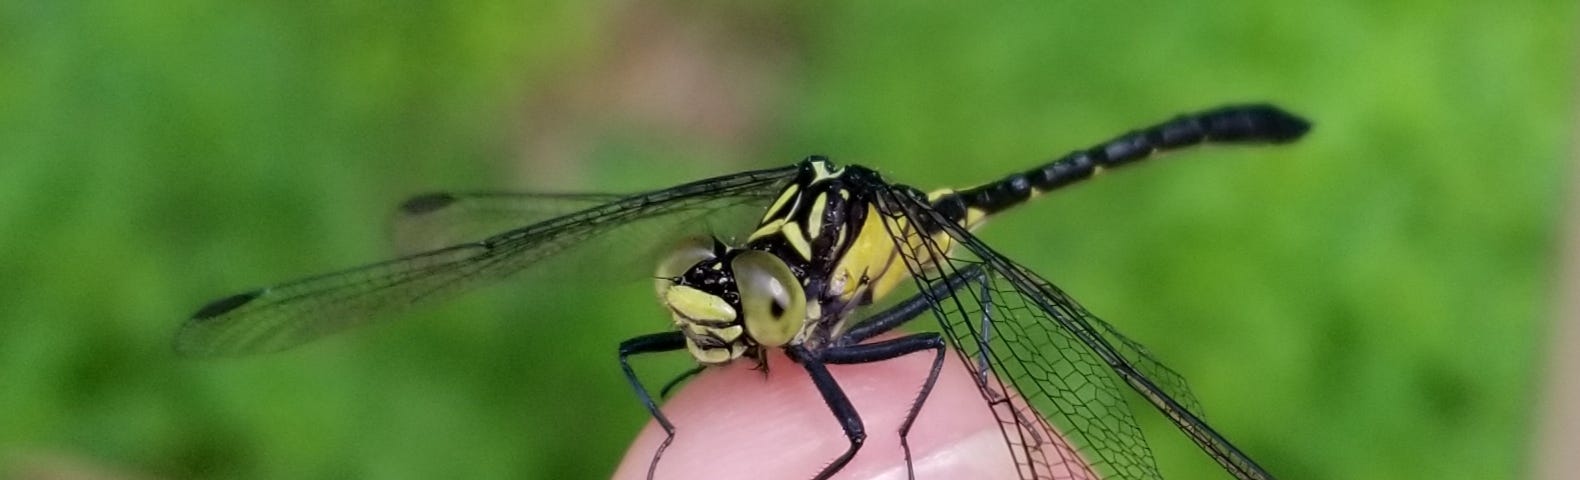 Southern pygmy clubtail, a type of dragonfly, sits on man’s thumb